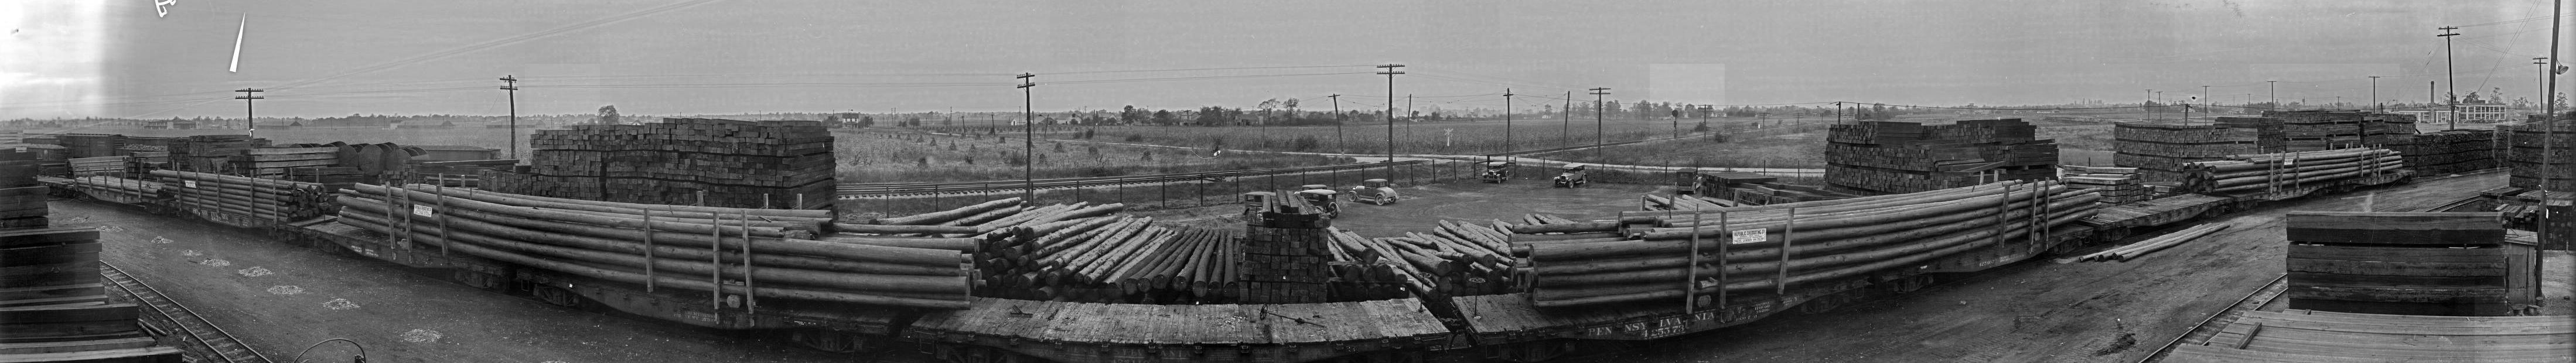 The plant operations along a railroad track with freight cars and stacks of lumber.